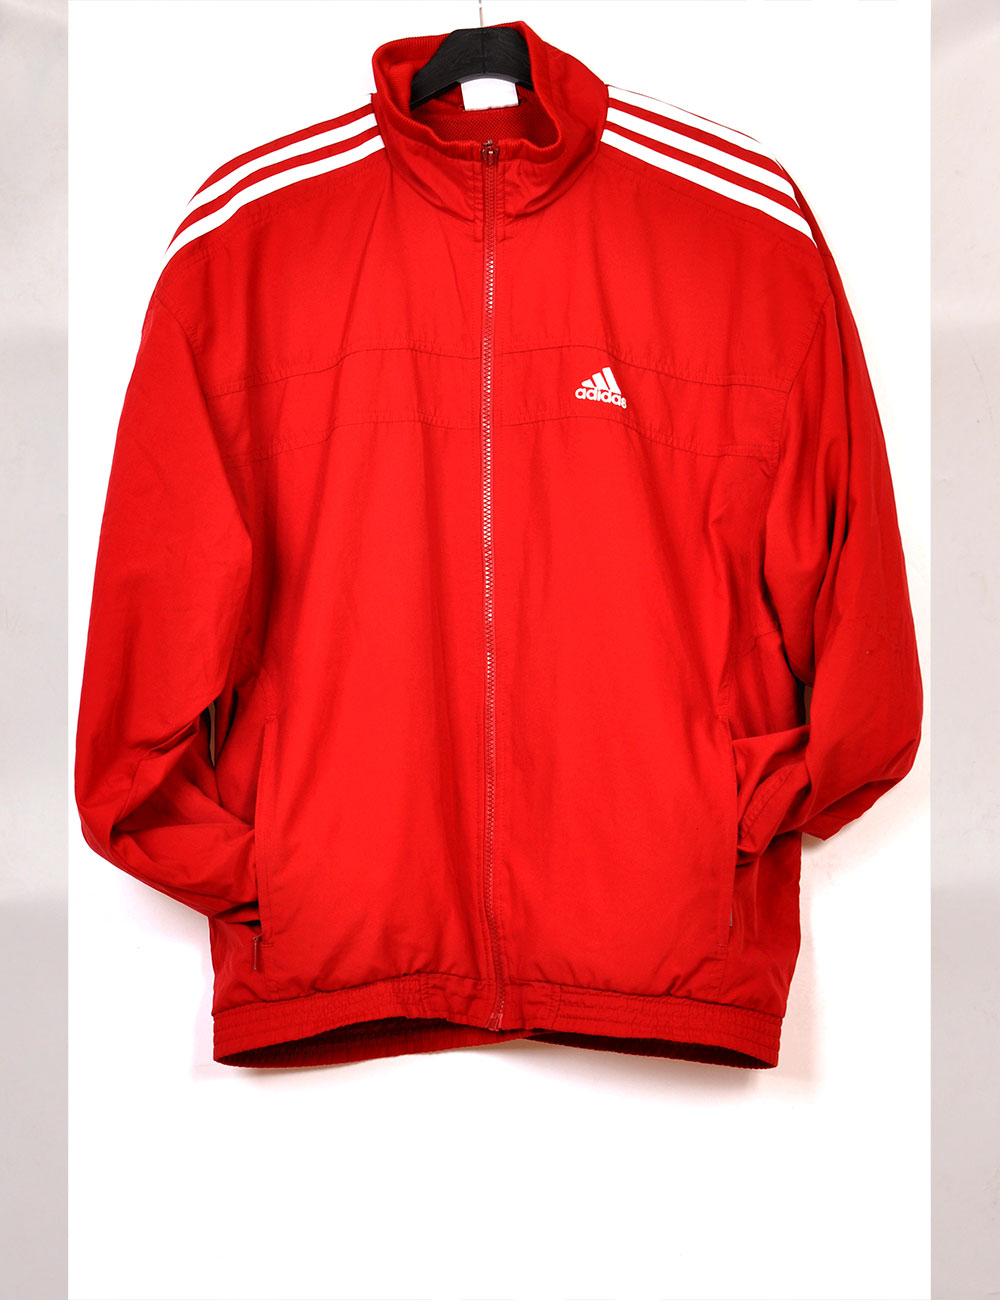 Adidas Light Jacket In Red